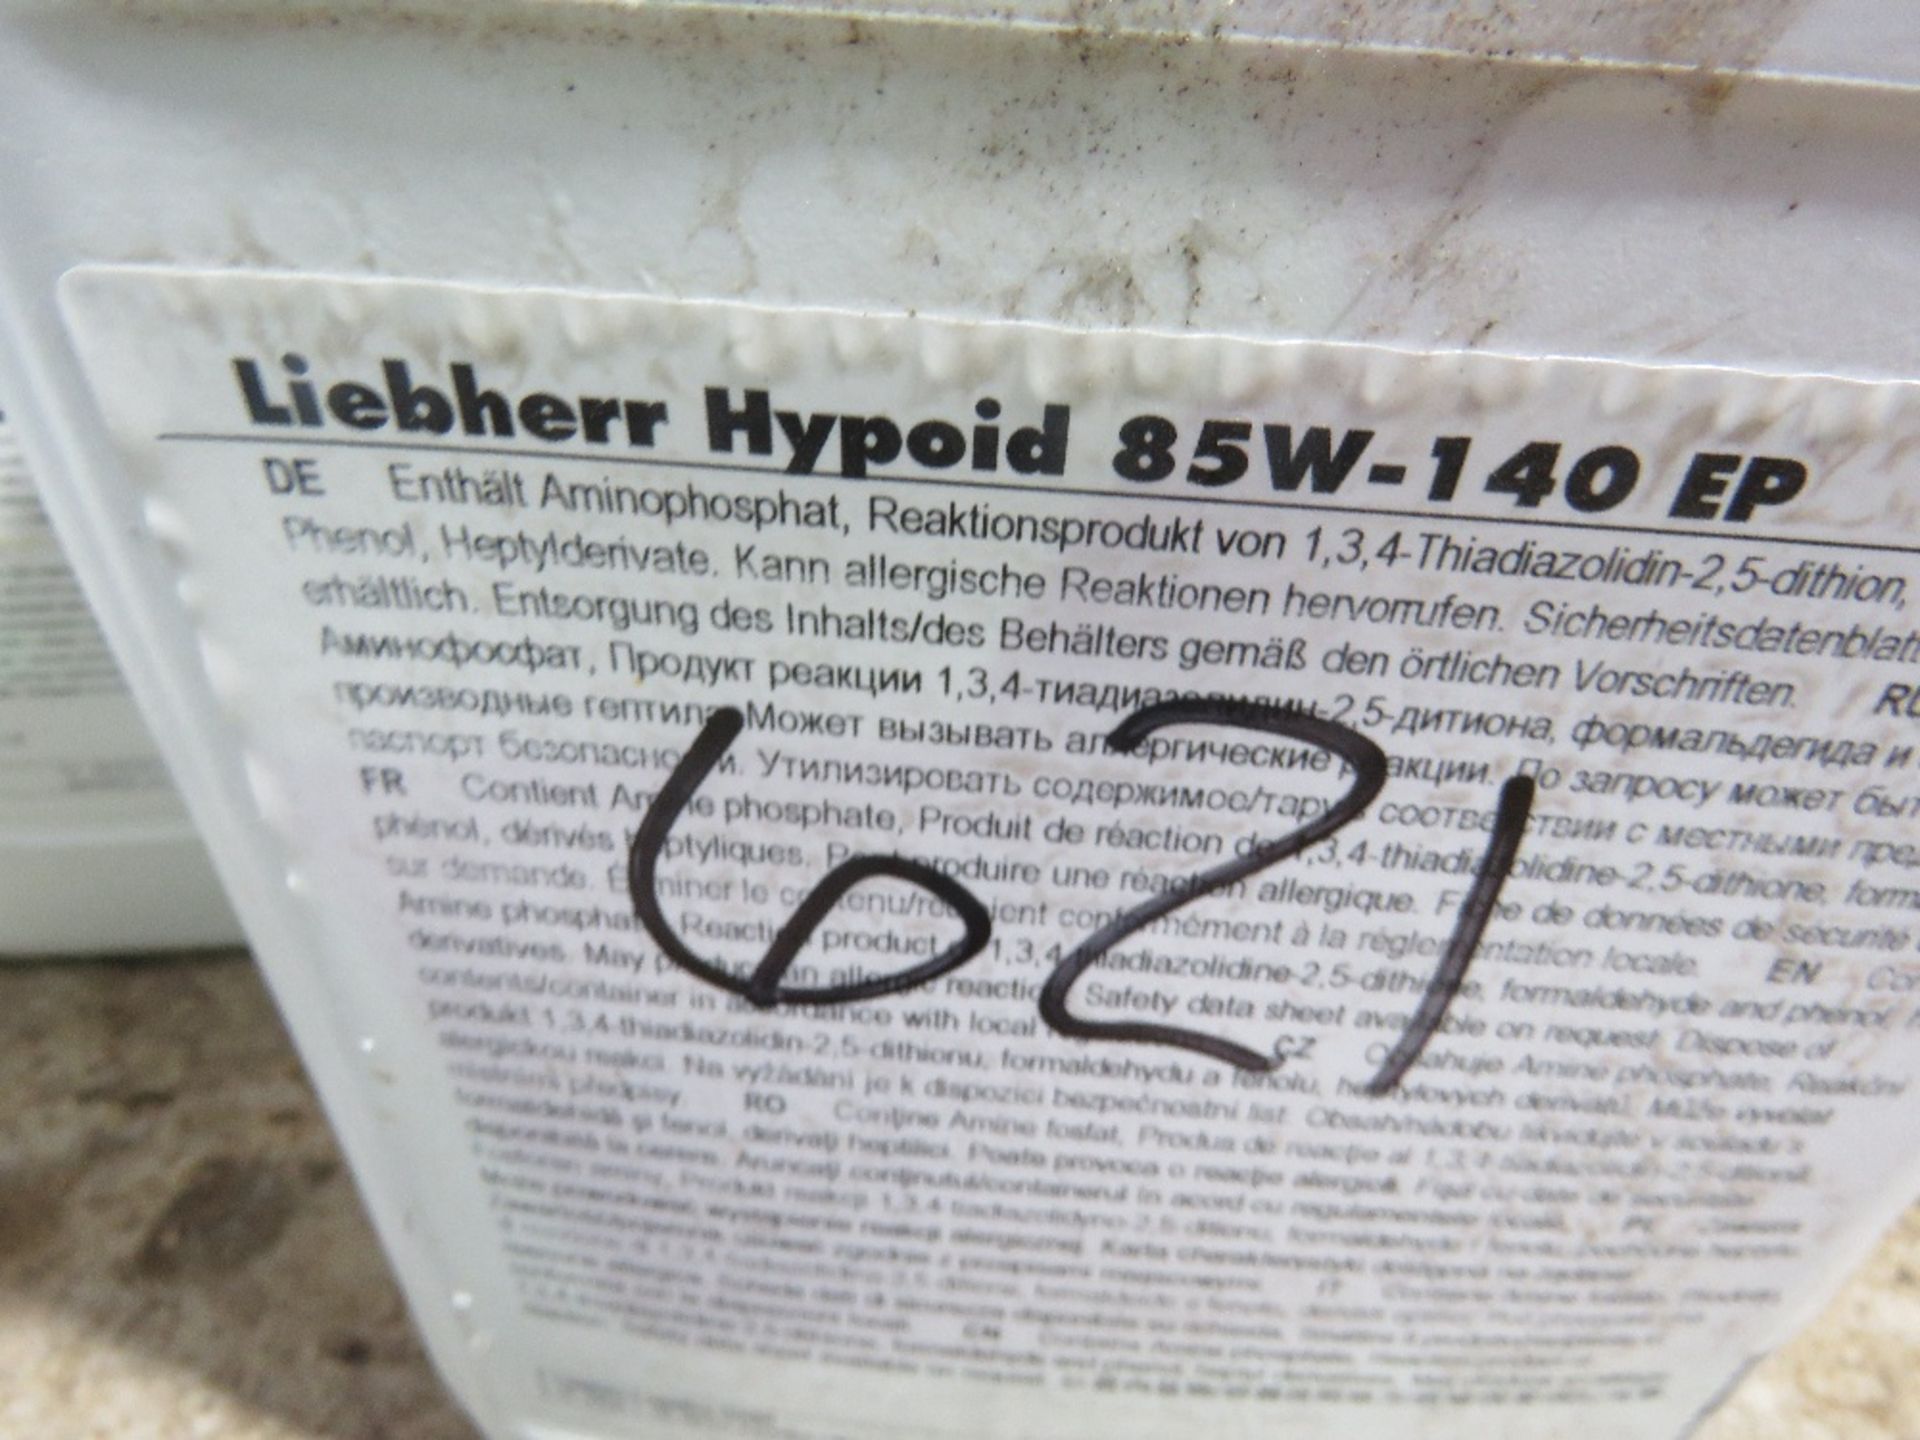 4 X LIEBHERR OIL CANS: HYPOID 85W140 AND A PART CAN OF ENGINE OIL. THIS LOT IS SOLD UNDER THE AUC - Image 5 of 5